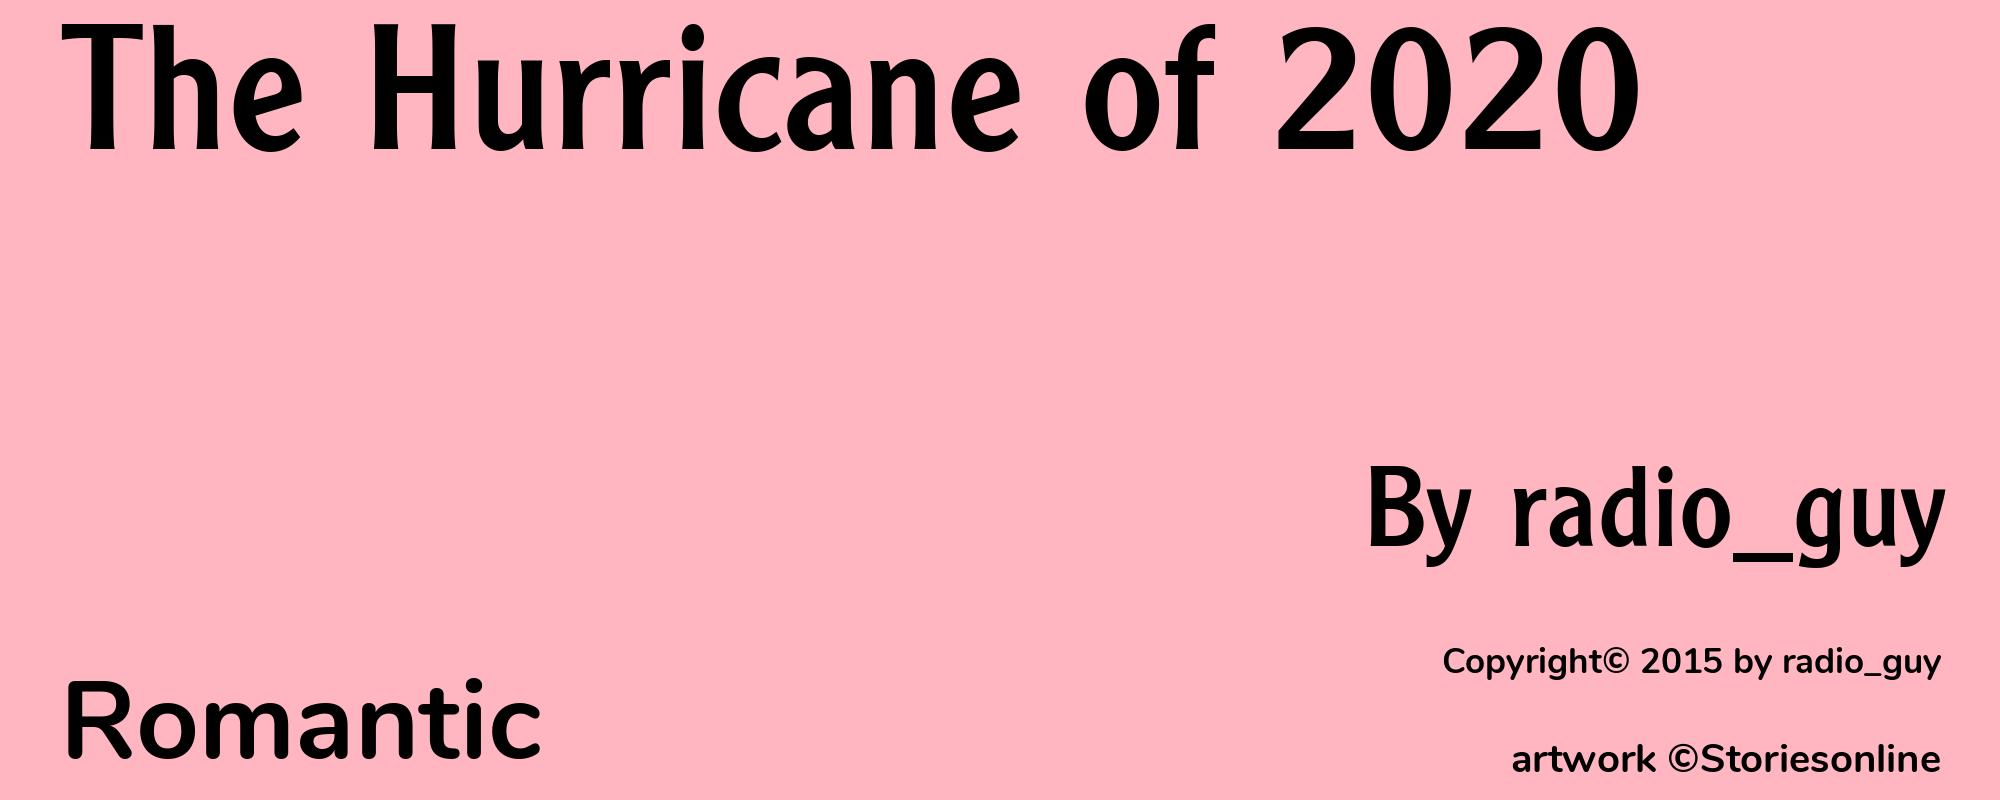 The Hurricane of 2020 - Cover